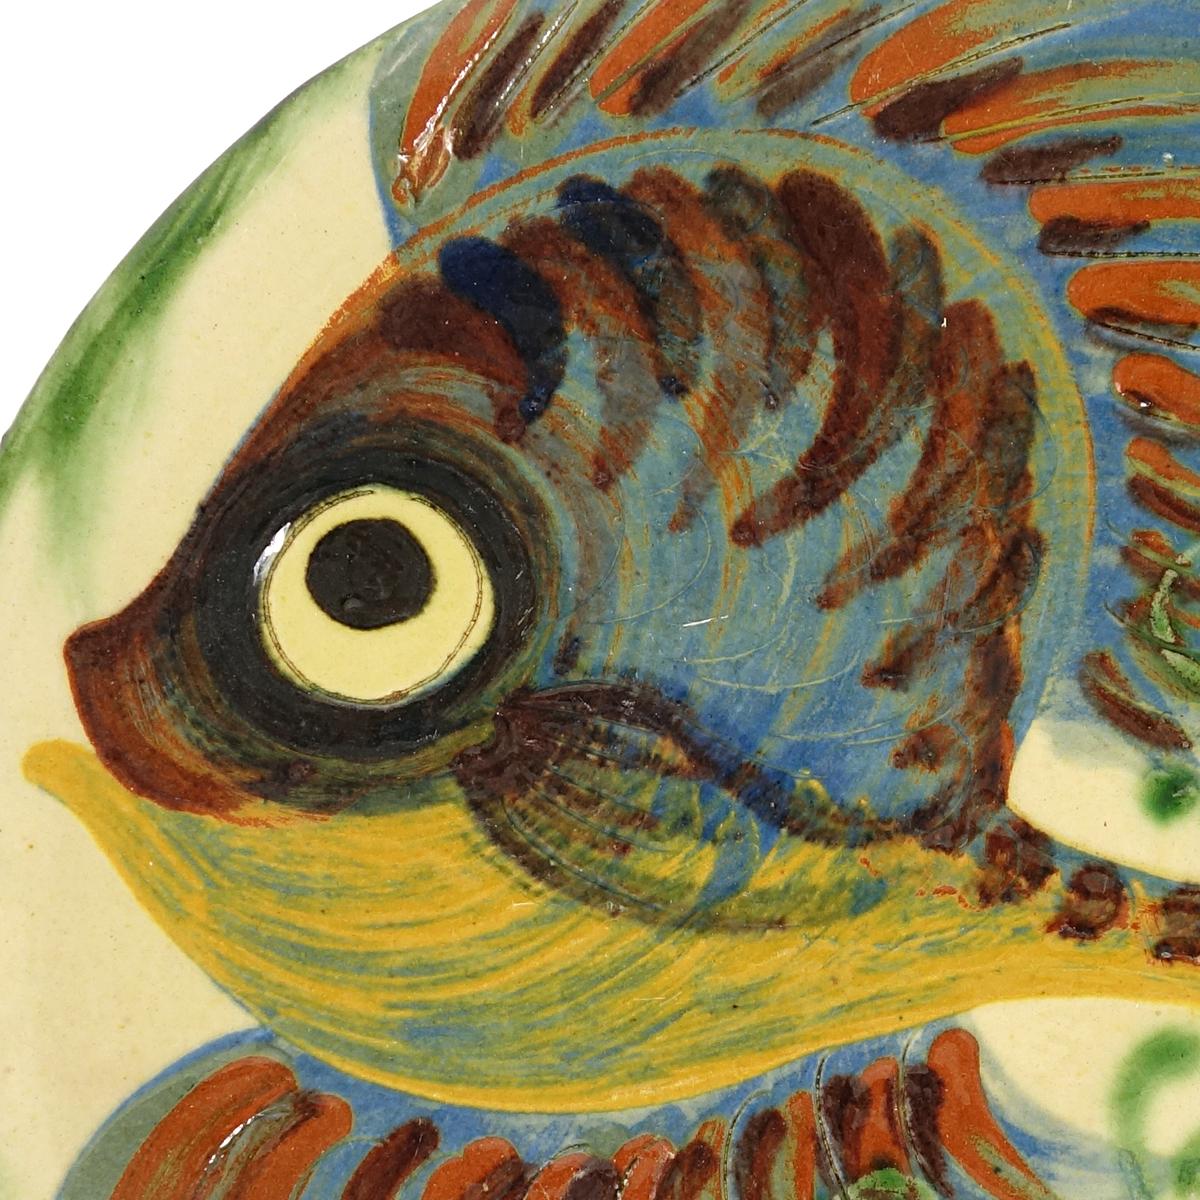 Set of Two Fish Decorated Ceramic Wall Plates by Puigdemont  1